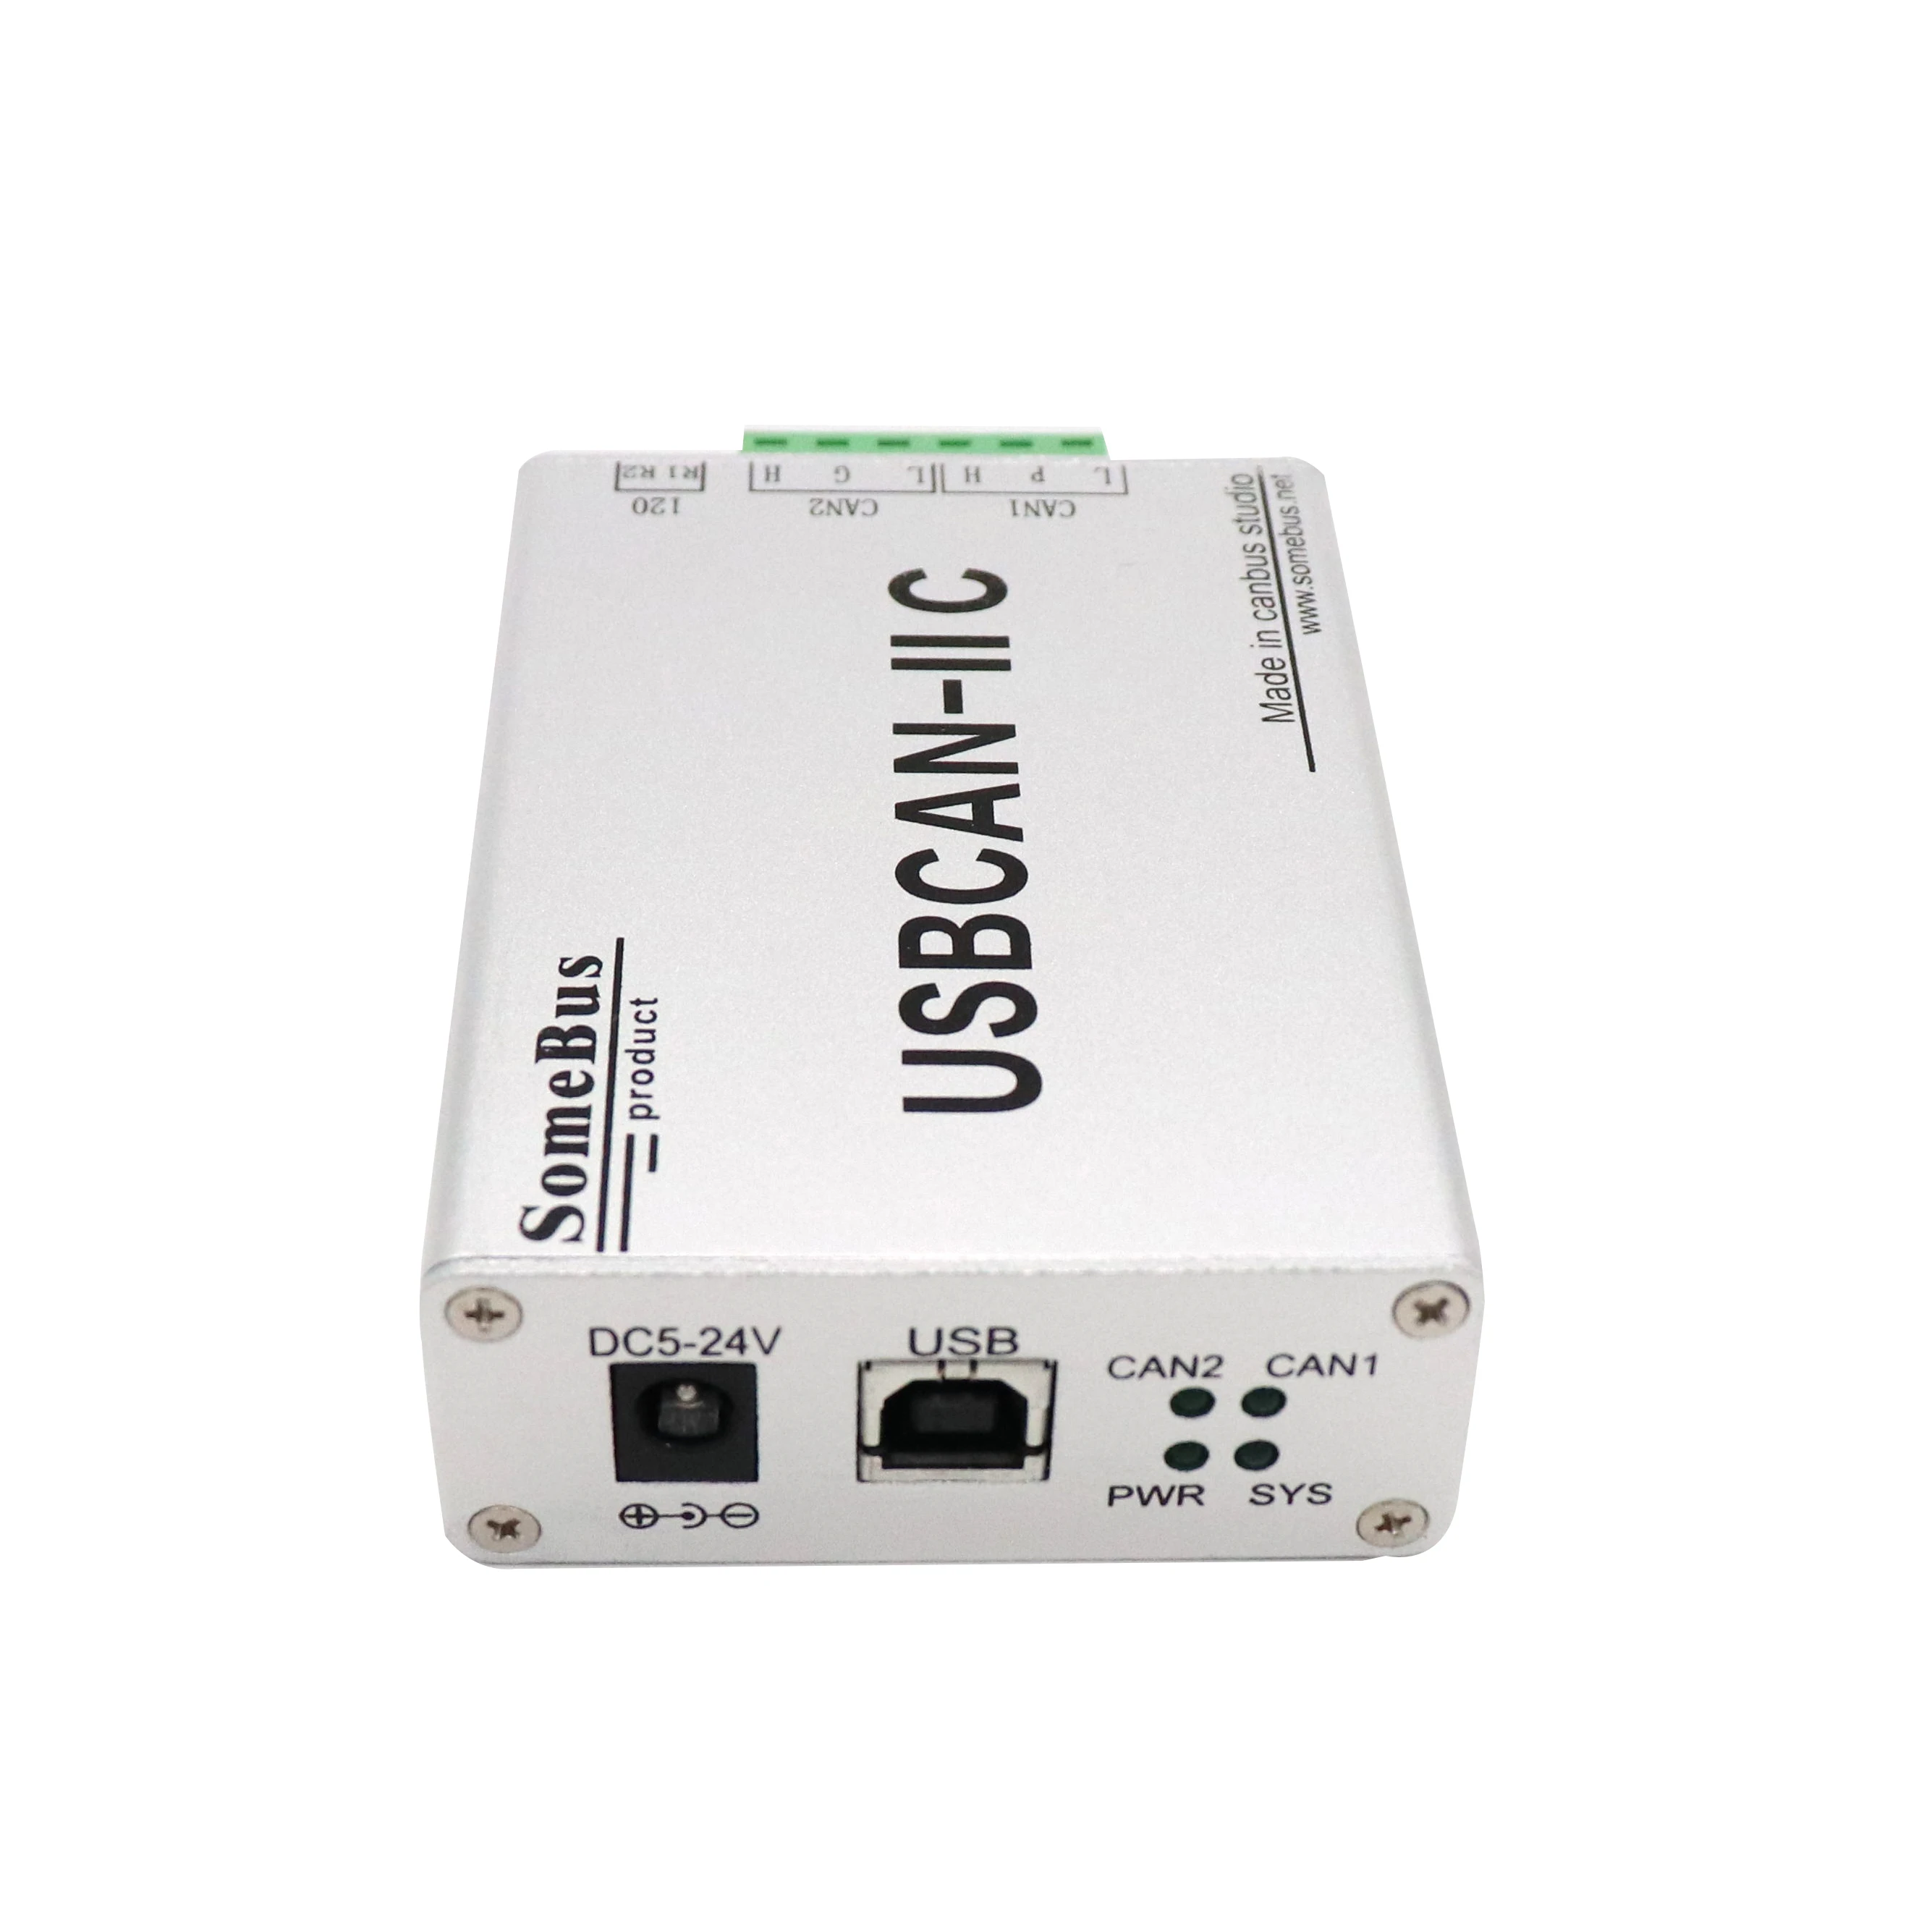 Industrial CAN-bus Communication Interface Card for High-speed, Big Data Communication